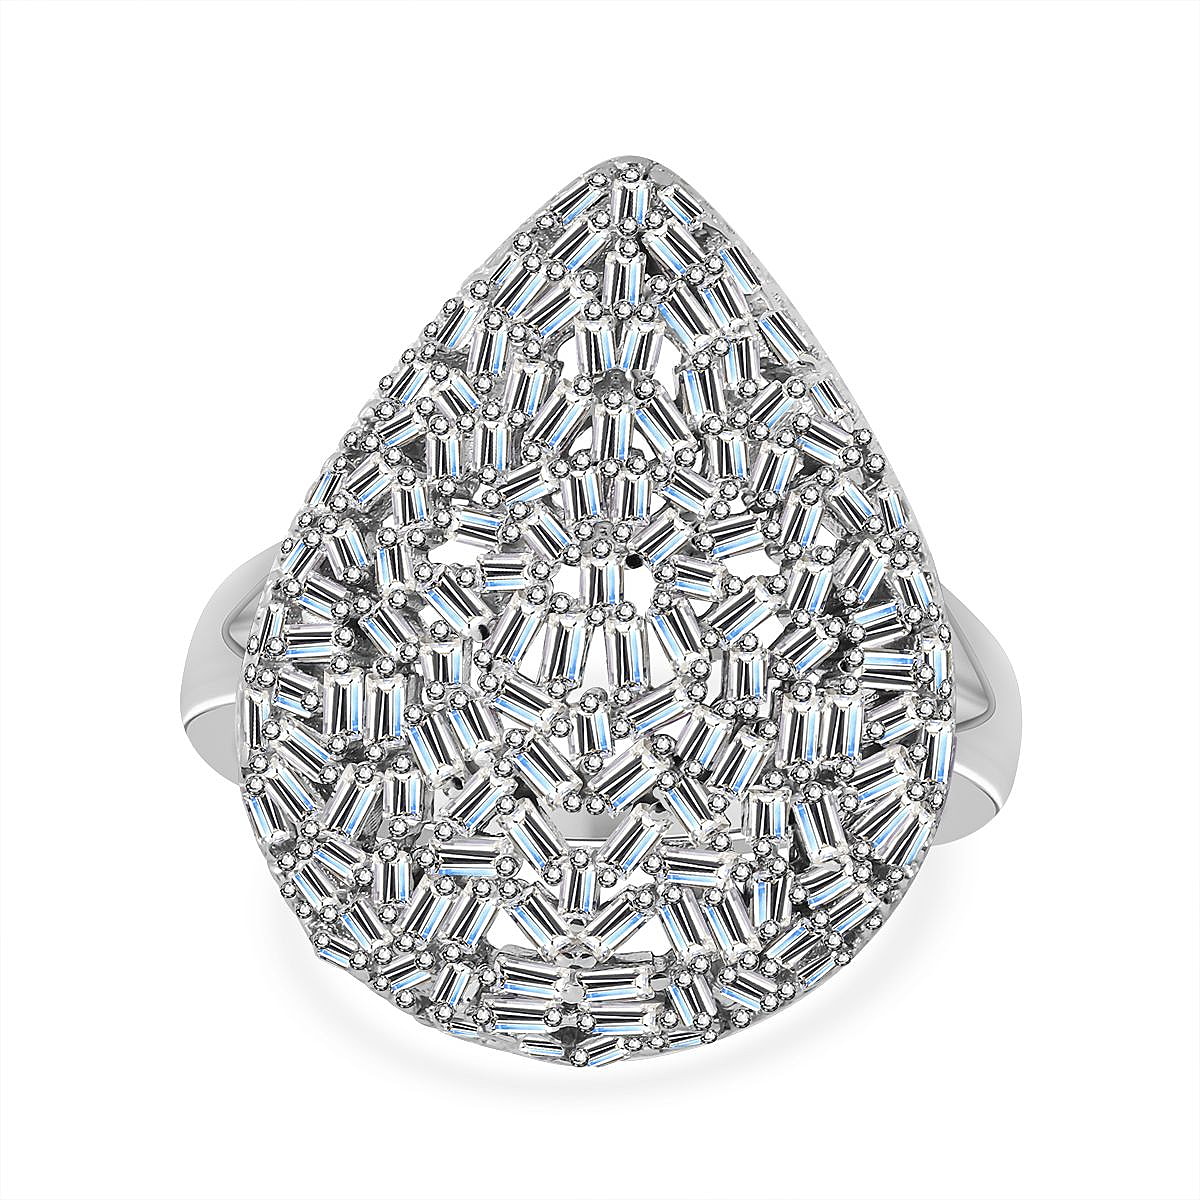 Red Carpet Collection - Fire Cracker Cubic Zirconia Ring in Rhodium Overlay Sterling Silver, Silver Wt 6.80 GM